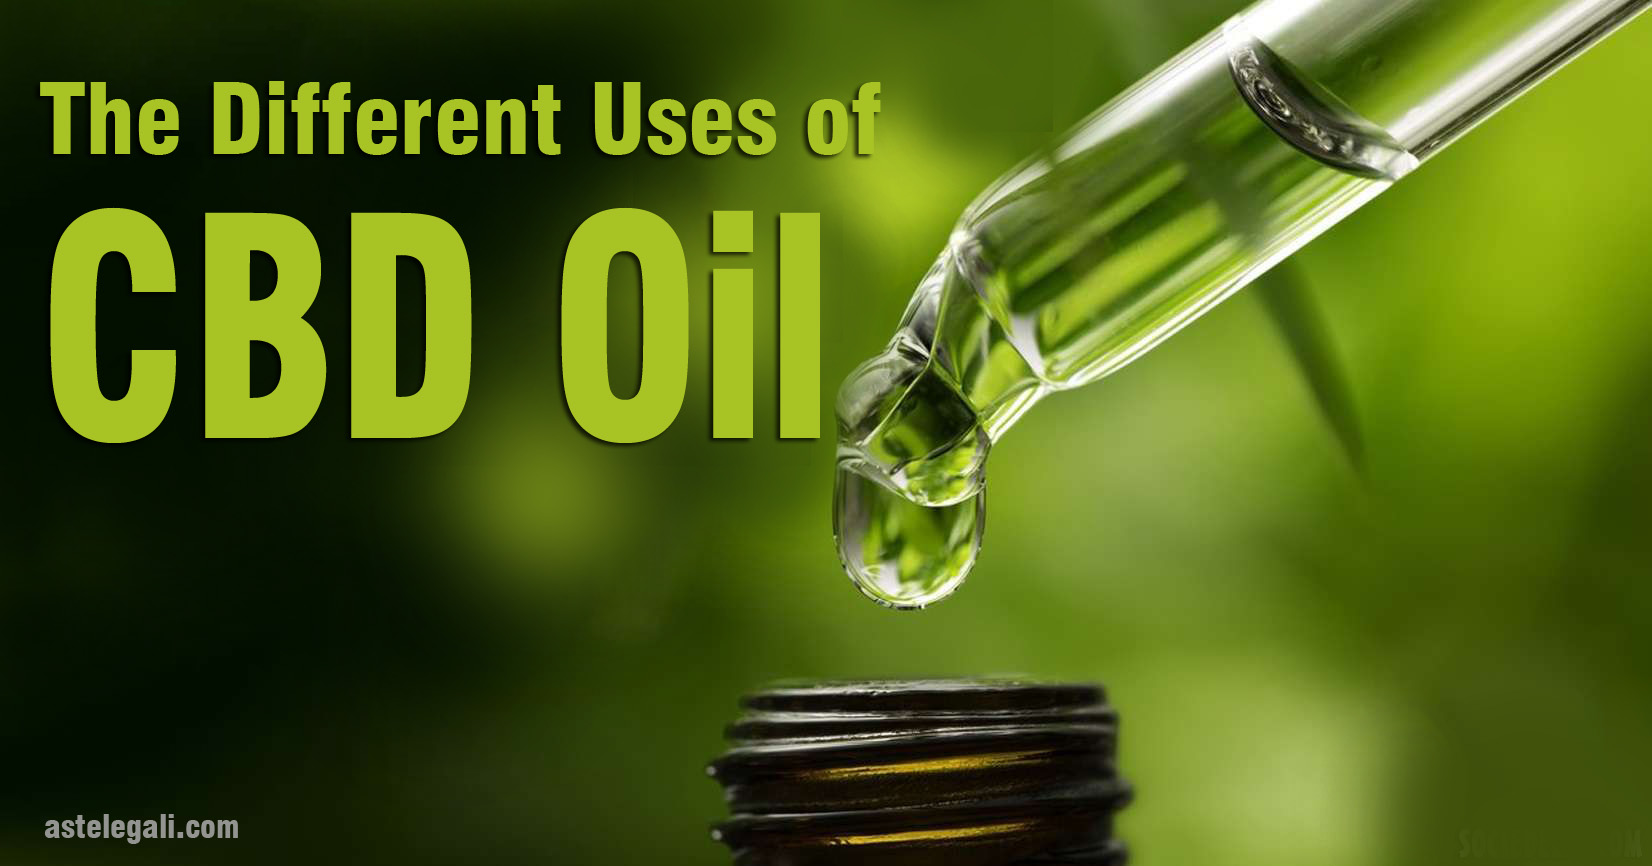 The Different Uses of CBD Oil